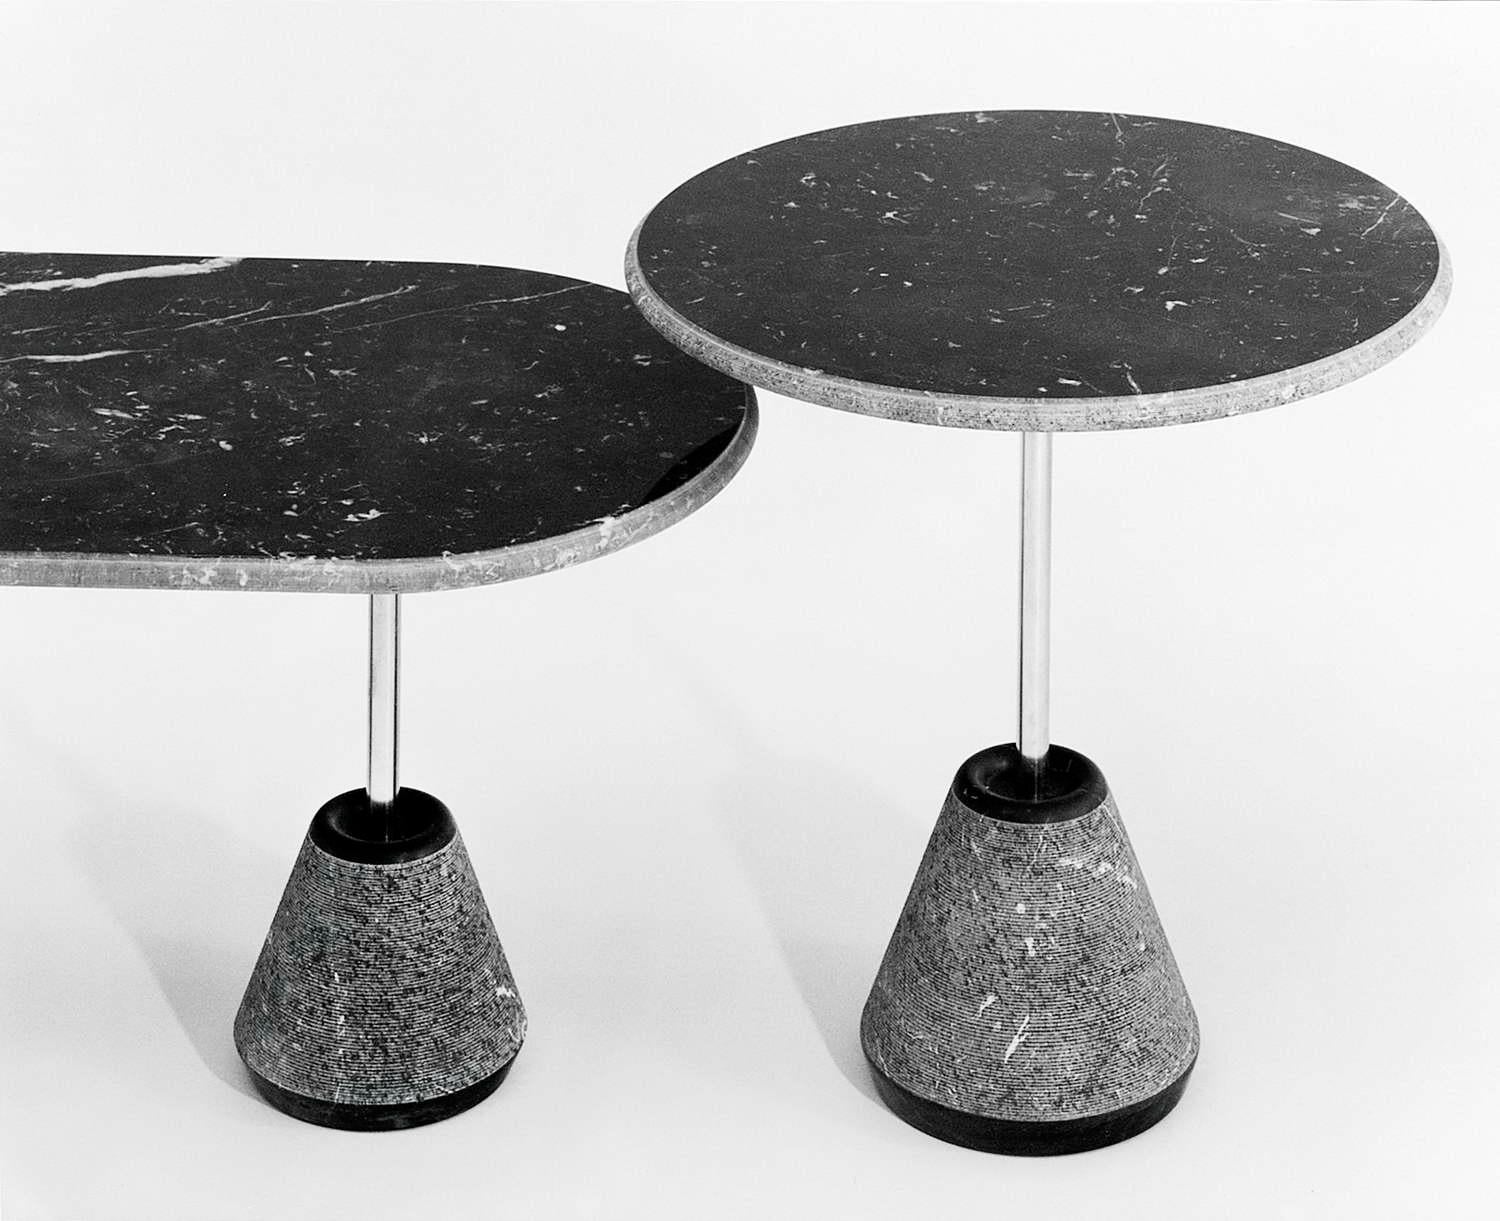 Italian 21st Century A.Castiglioni Ipaz 4 White/Black Marble+Steel Low Round Table h40 For Sale